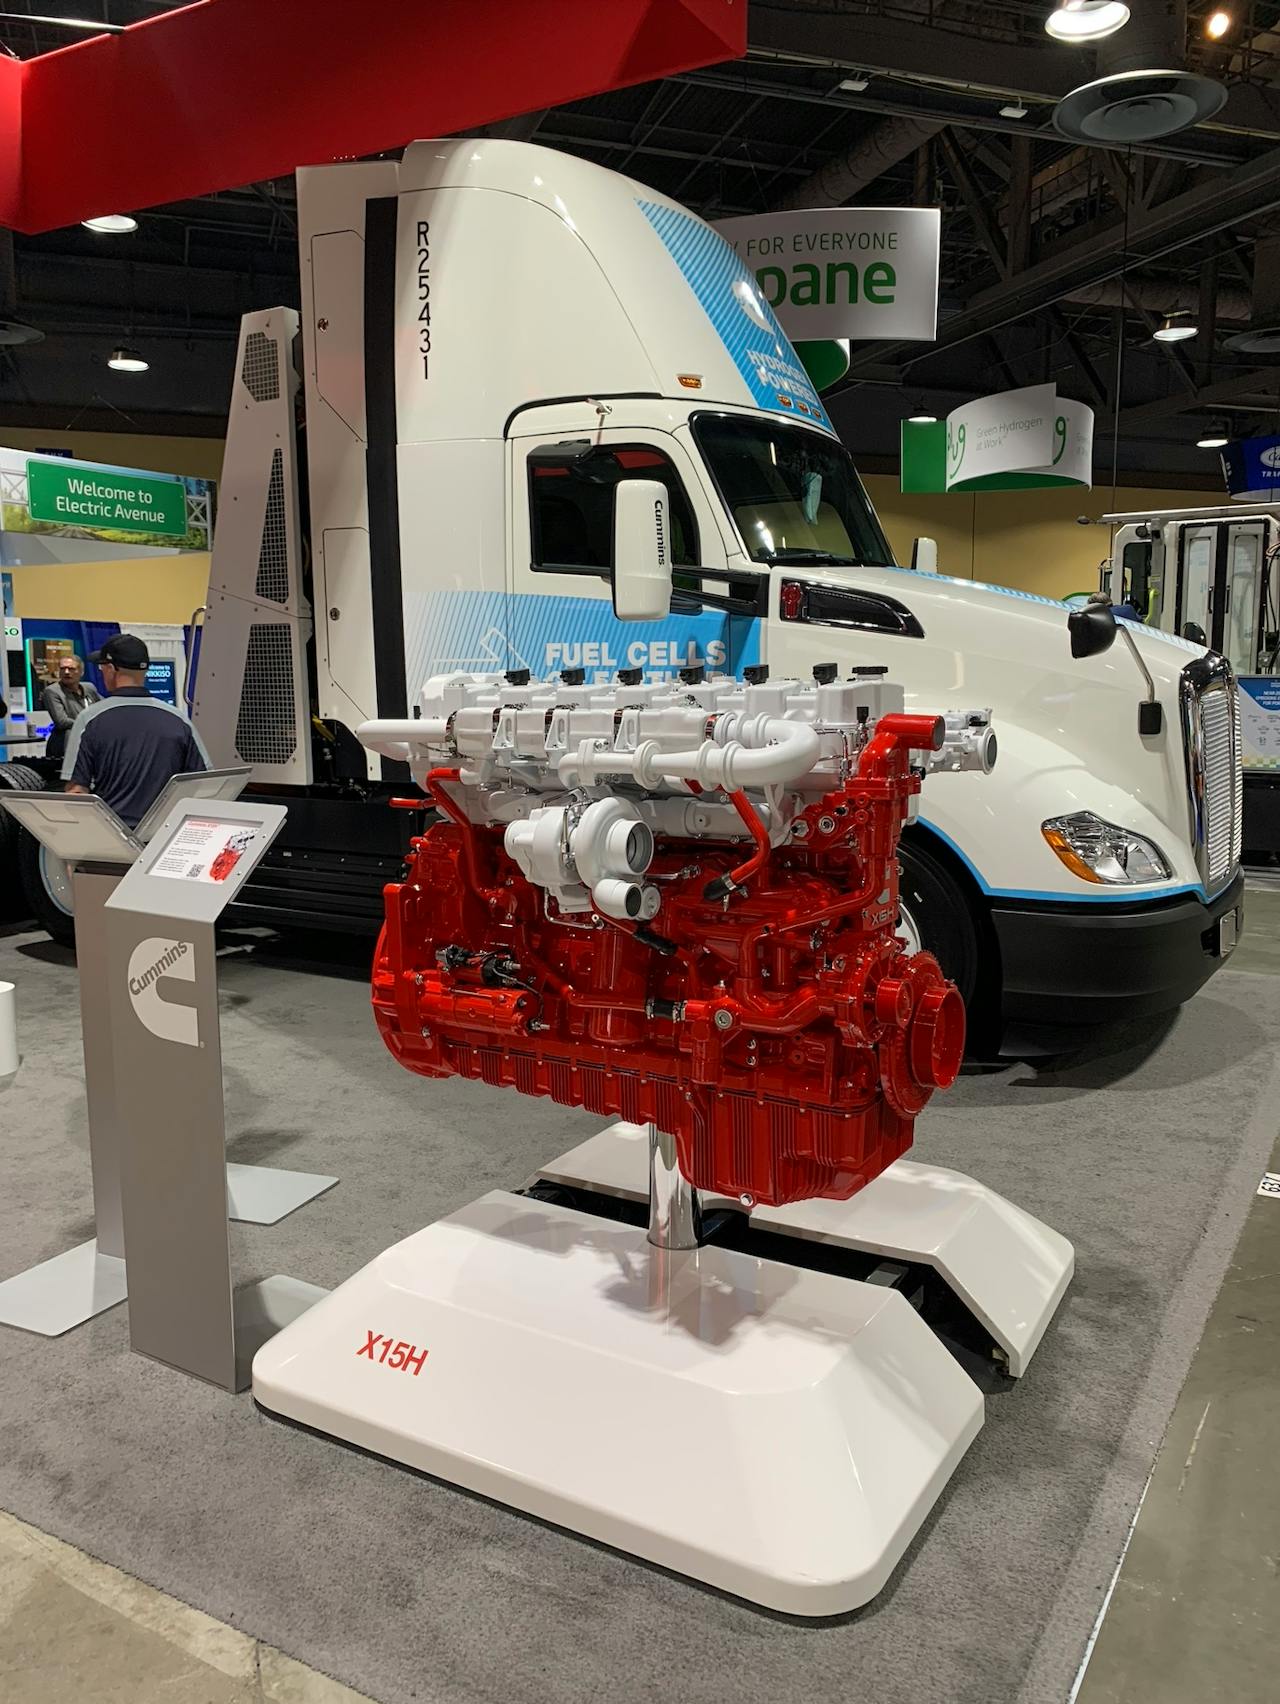 Cummins introduced their hydrogen engine, the X15H, recently at the Advanced Clean Transportation Expo in Long Beach, Calif. Through a new fuel agnostic approach, Cummins will be offering a variety of powertrains on the way to zero emissions including hydrogen internal combustion, hydrogen fuel cell, natural gas, propane, gasoline and all-electric. “We’ve established significant goals as part of our PLANET 2050 sustainability strategy, including a target of zero emissions,” said Srikanth Padmanabhan, president of engine business at Cummins. “Reducing well-to-wheels carbon emissions requires innovation of both energy sources and power solutions.'